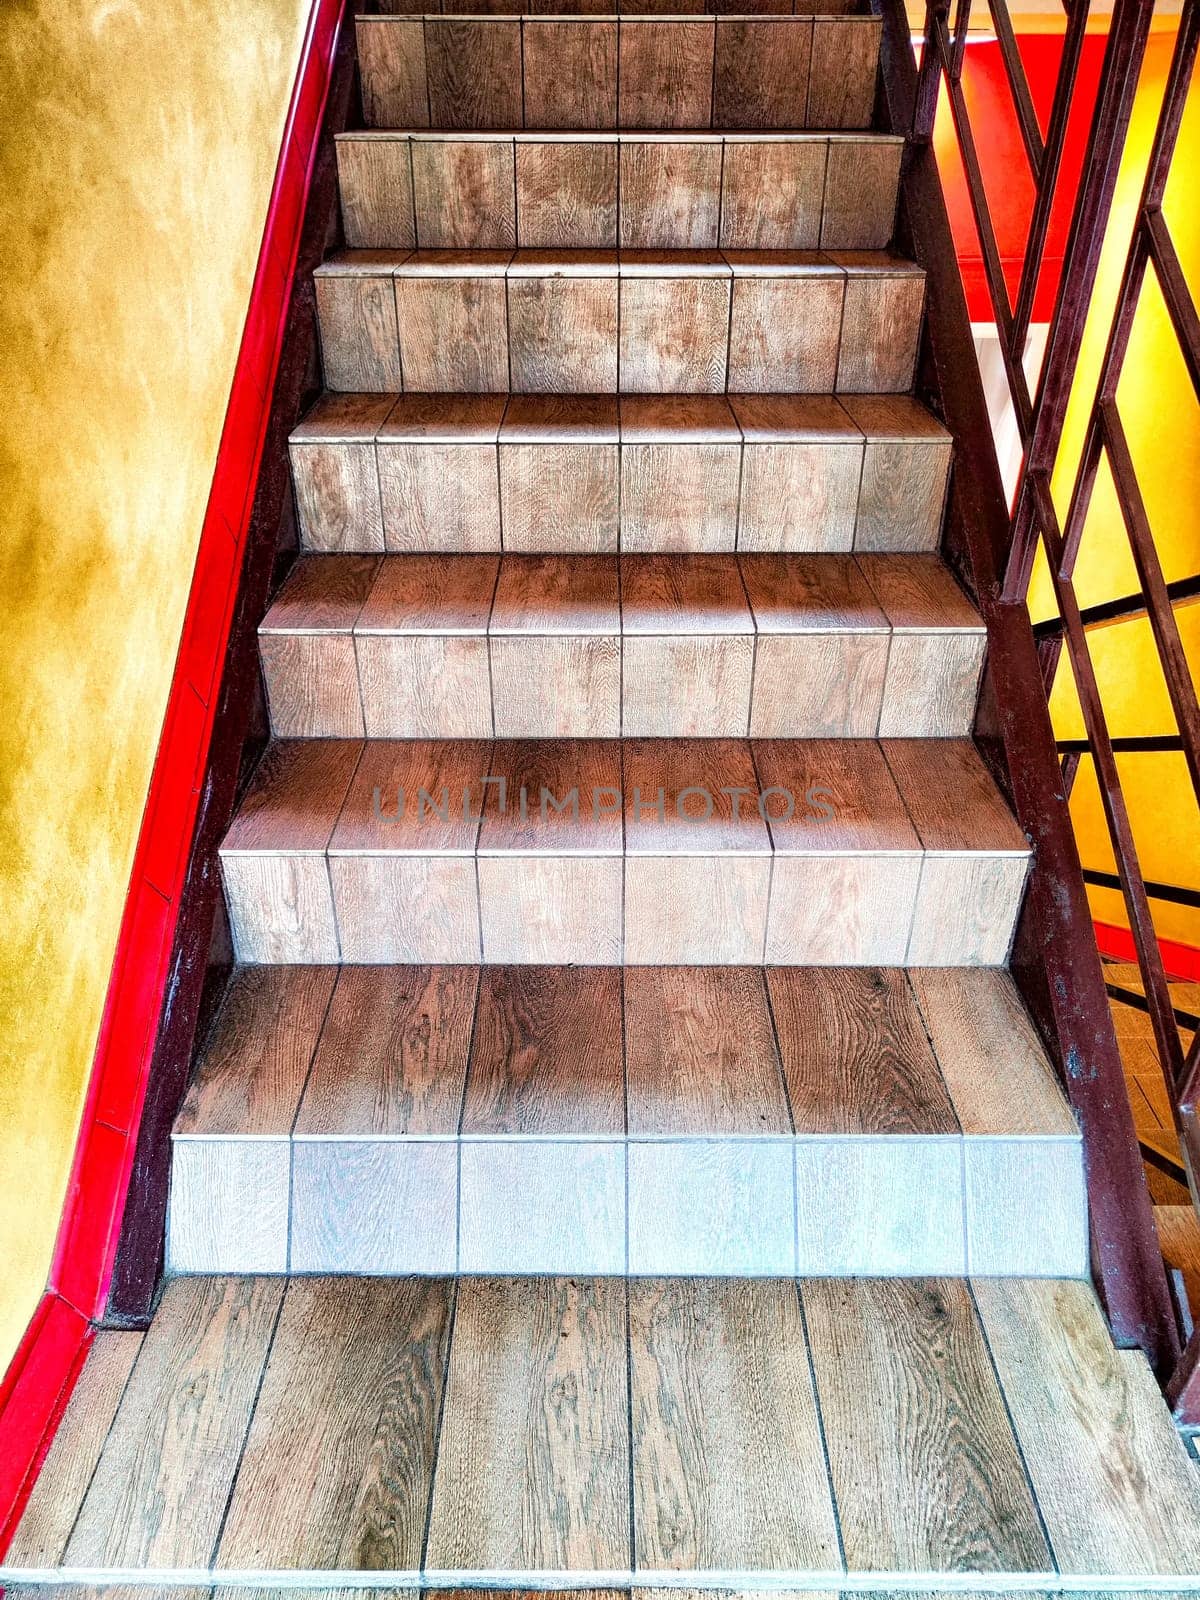 Warmly Lit Wooden Staircase With Red Handrails. A staircase with wooden steps and bright red handrails by keleny